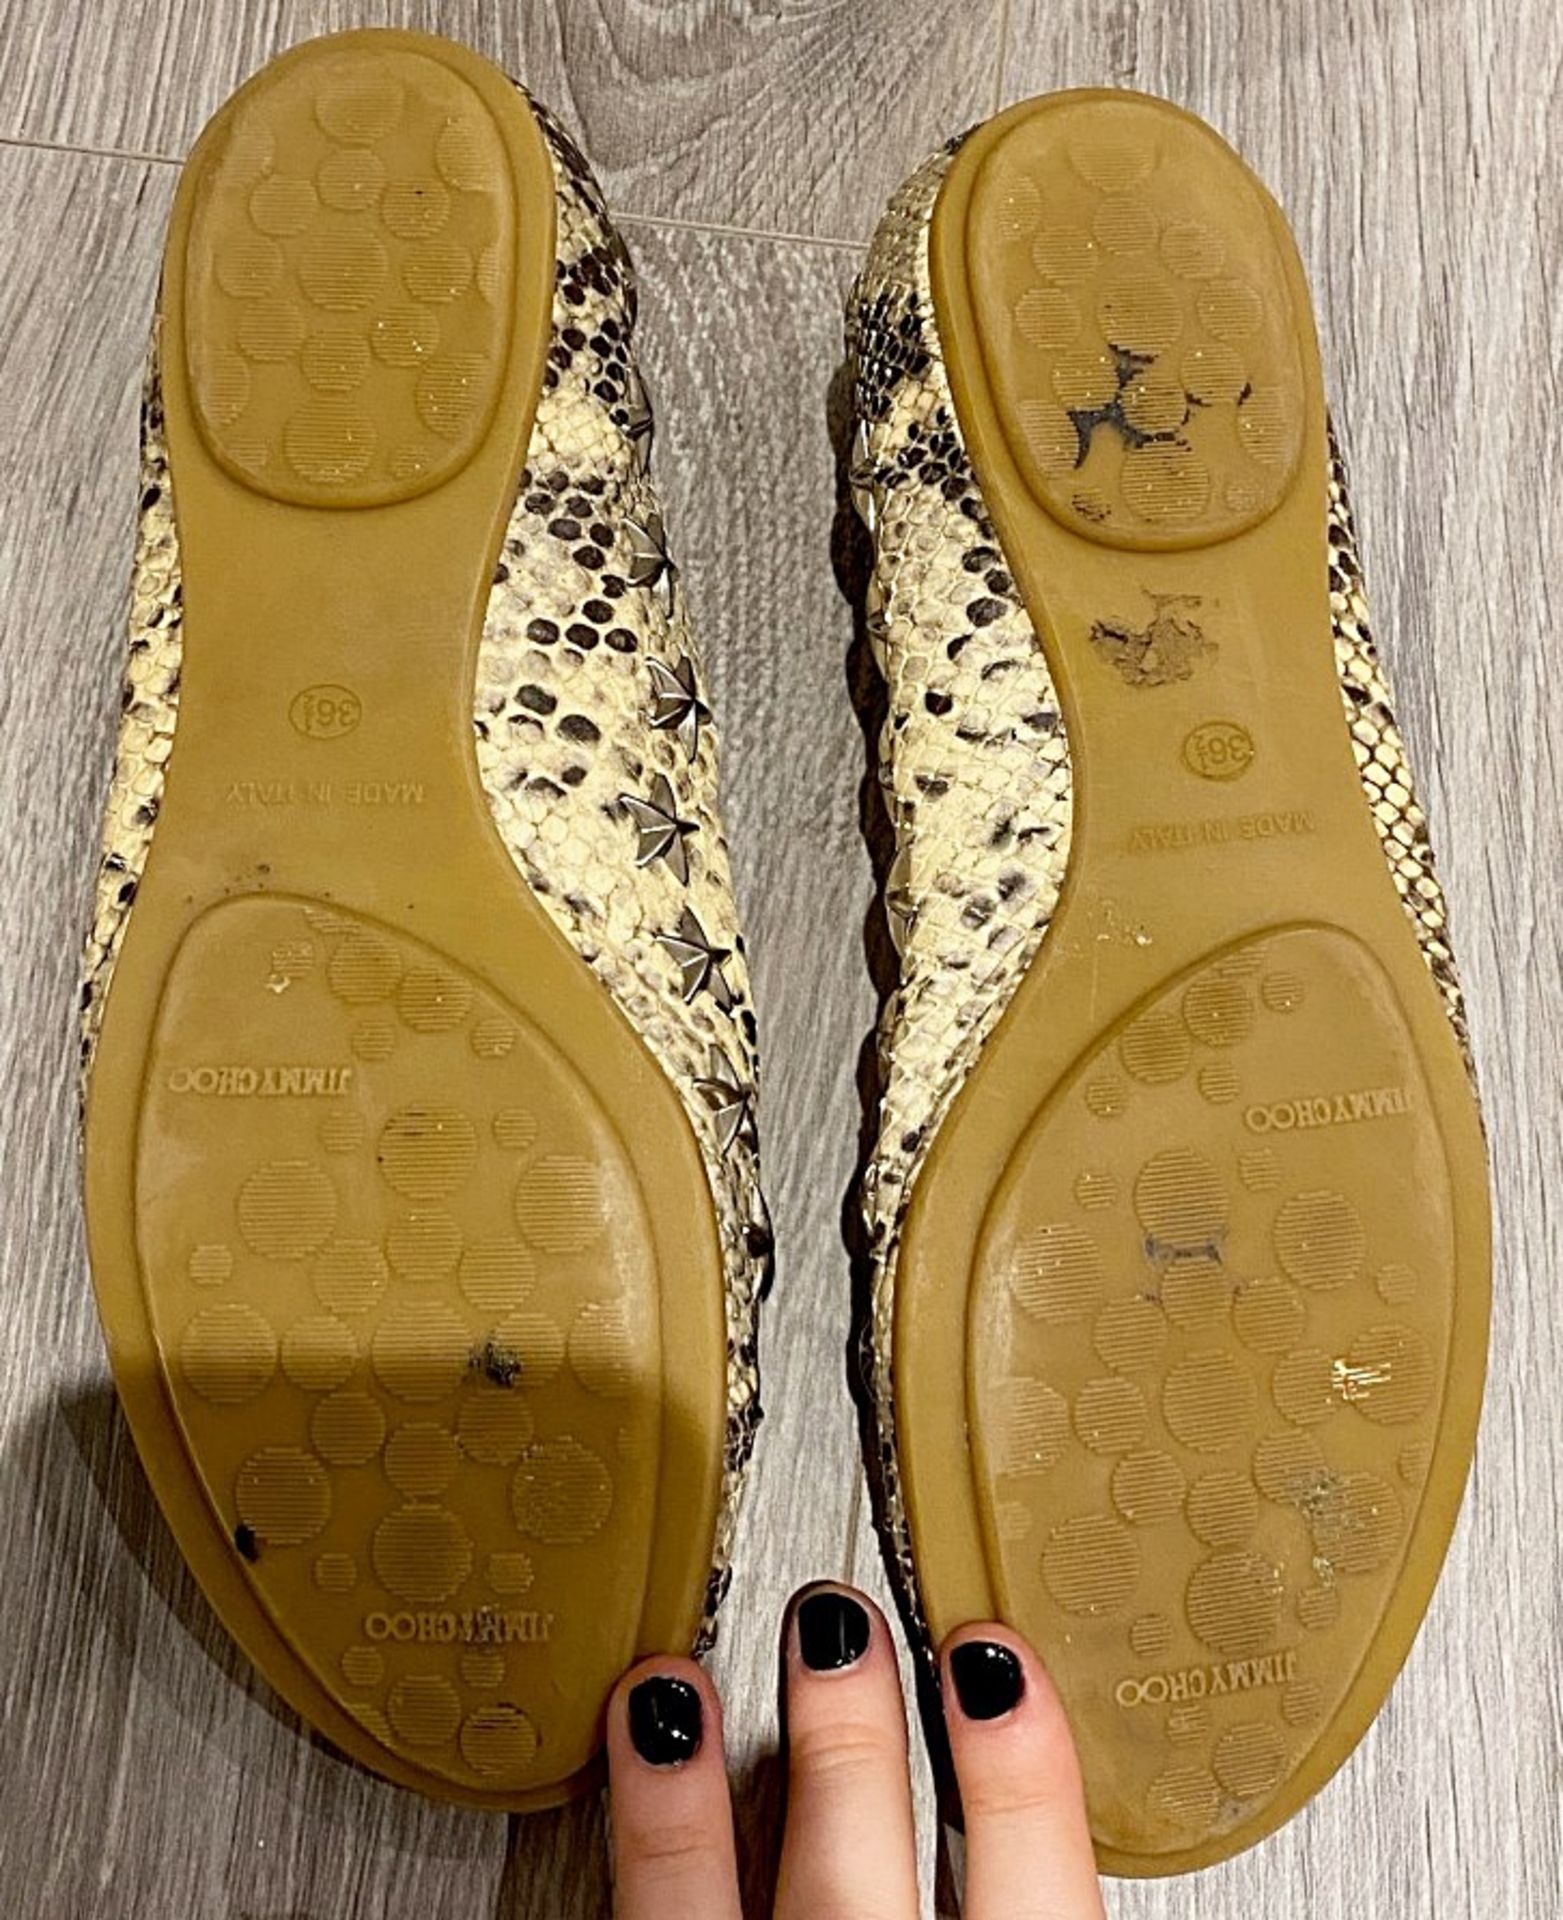 1 x Pair Of Genuine Jimmy Choo Flats In Snake Print - Size: 36 - Preowned in Very Good Condition - R - Image 2 of 3